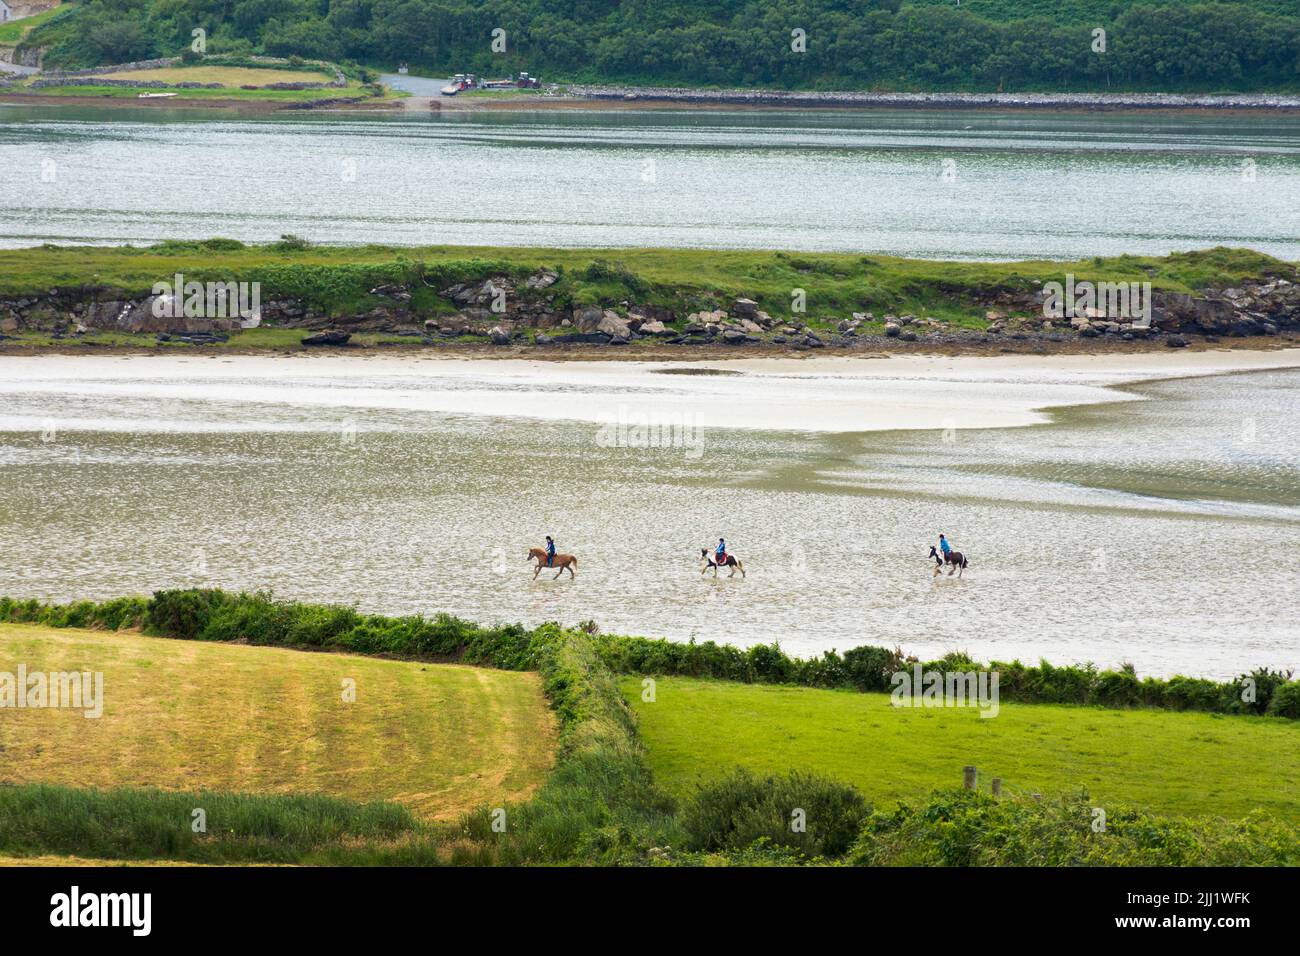 Horse riding on a beach in Ardara, County Donegal, Ireland Stock Photo